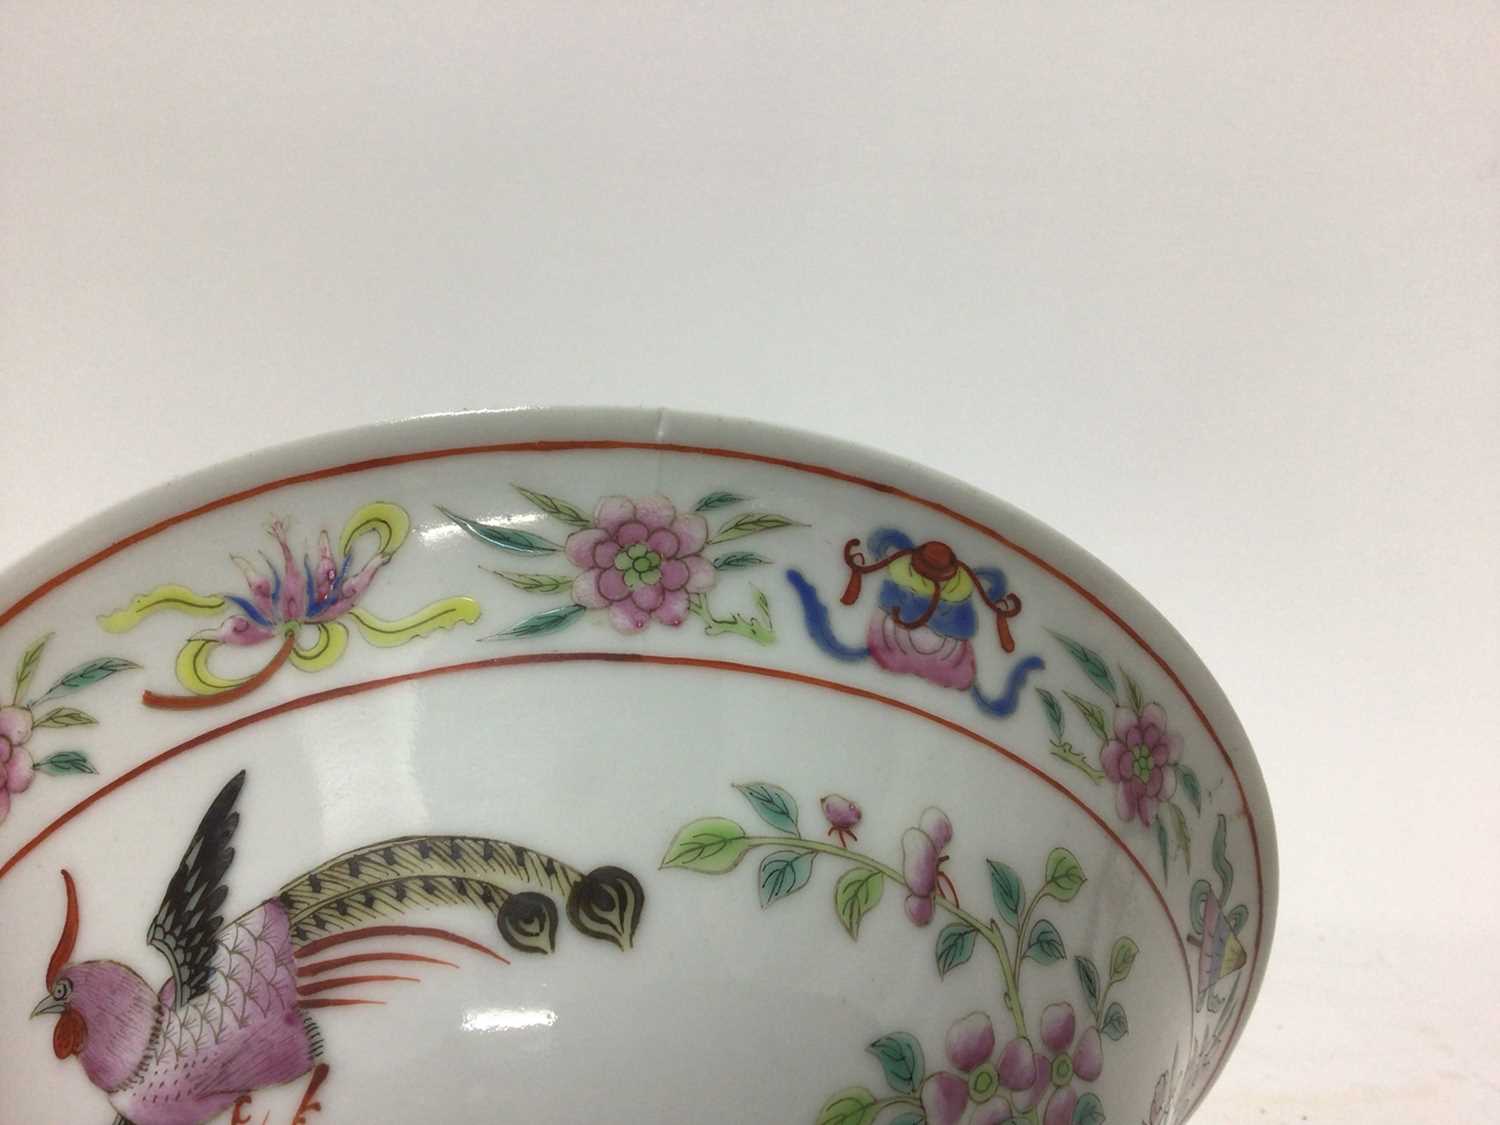 Pair of Chinese famille rose porcelain bowls, c.1900, decorated with tropical birds, flowers and aus - Image 9 of 9